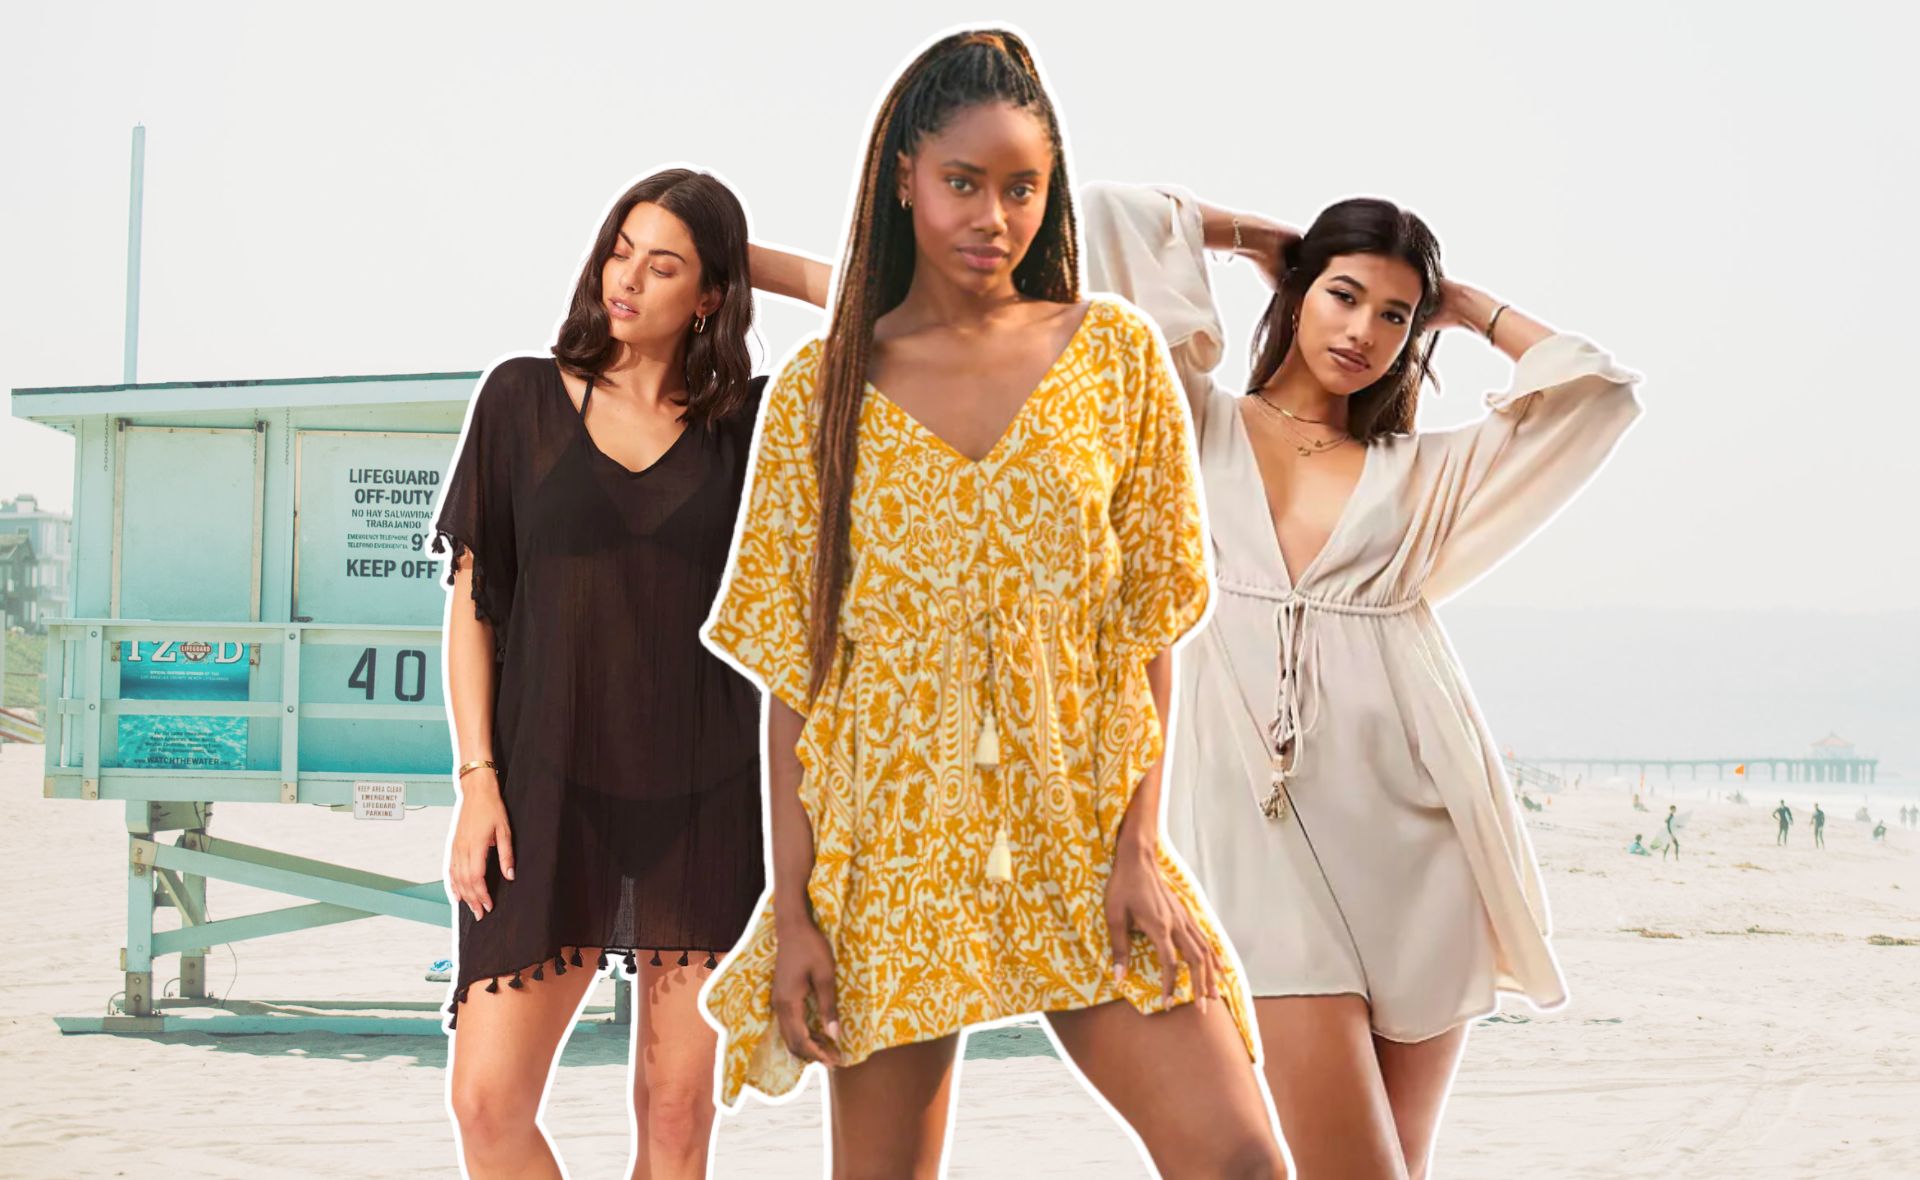 Go with the flow in style with these 9 beach kaftans